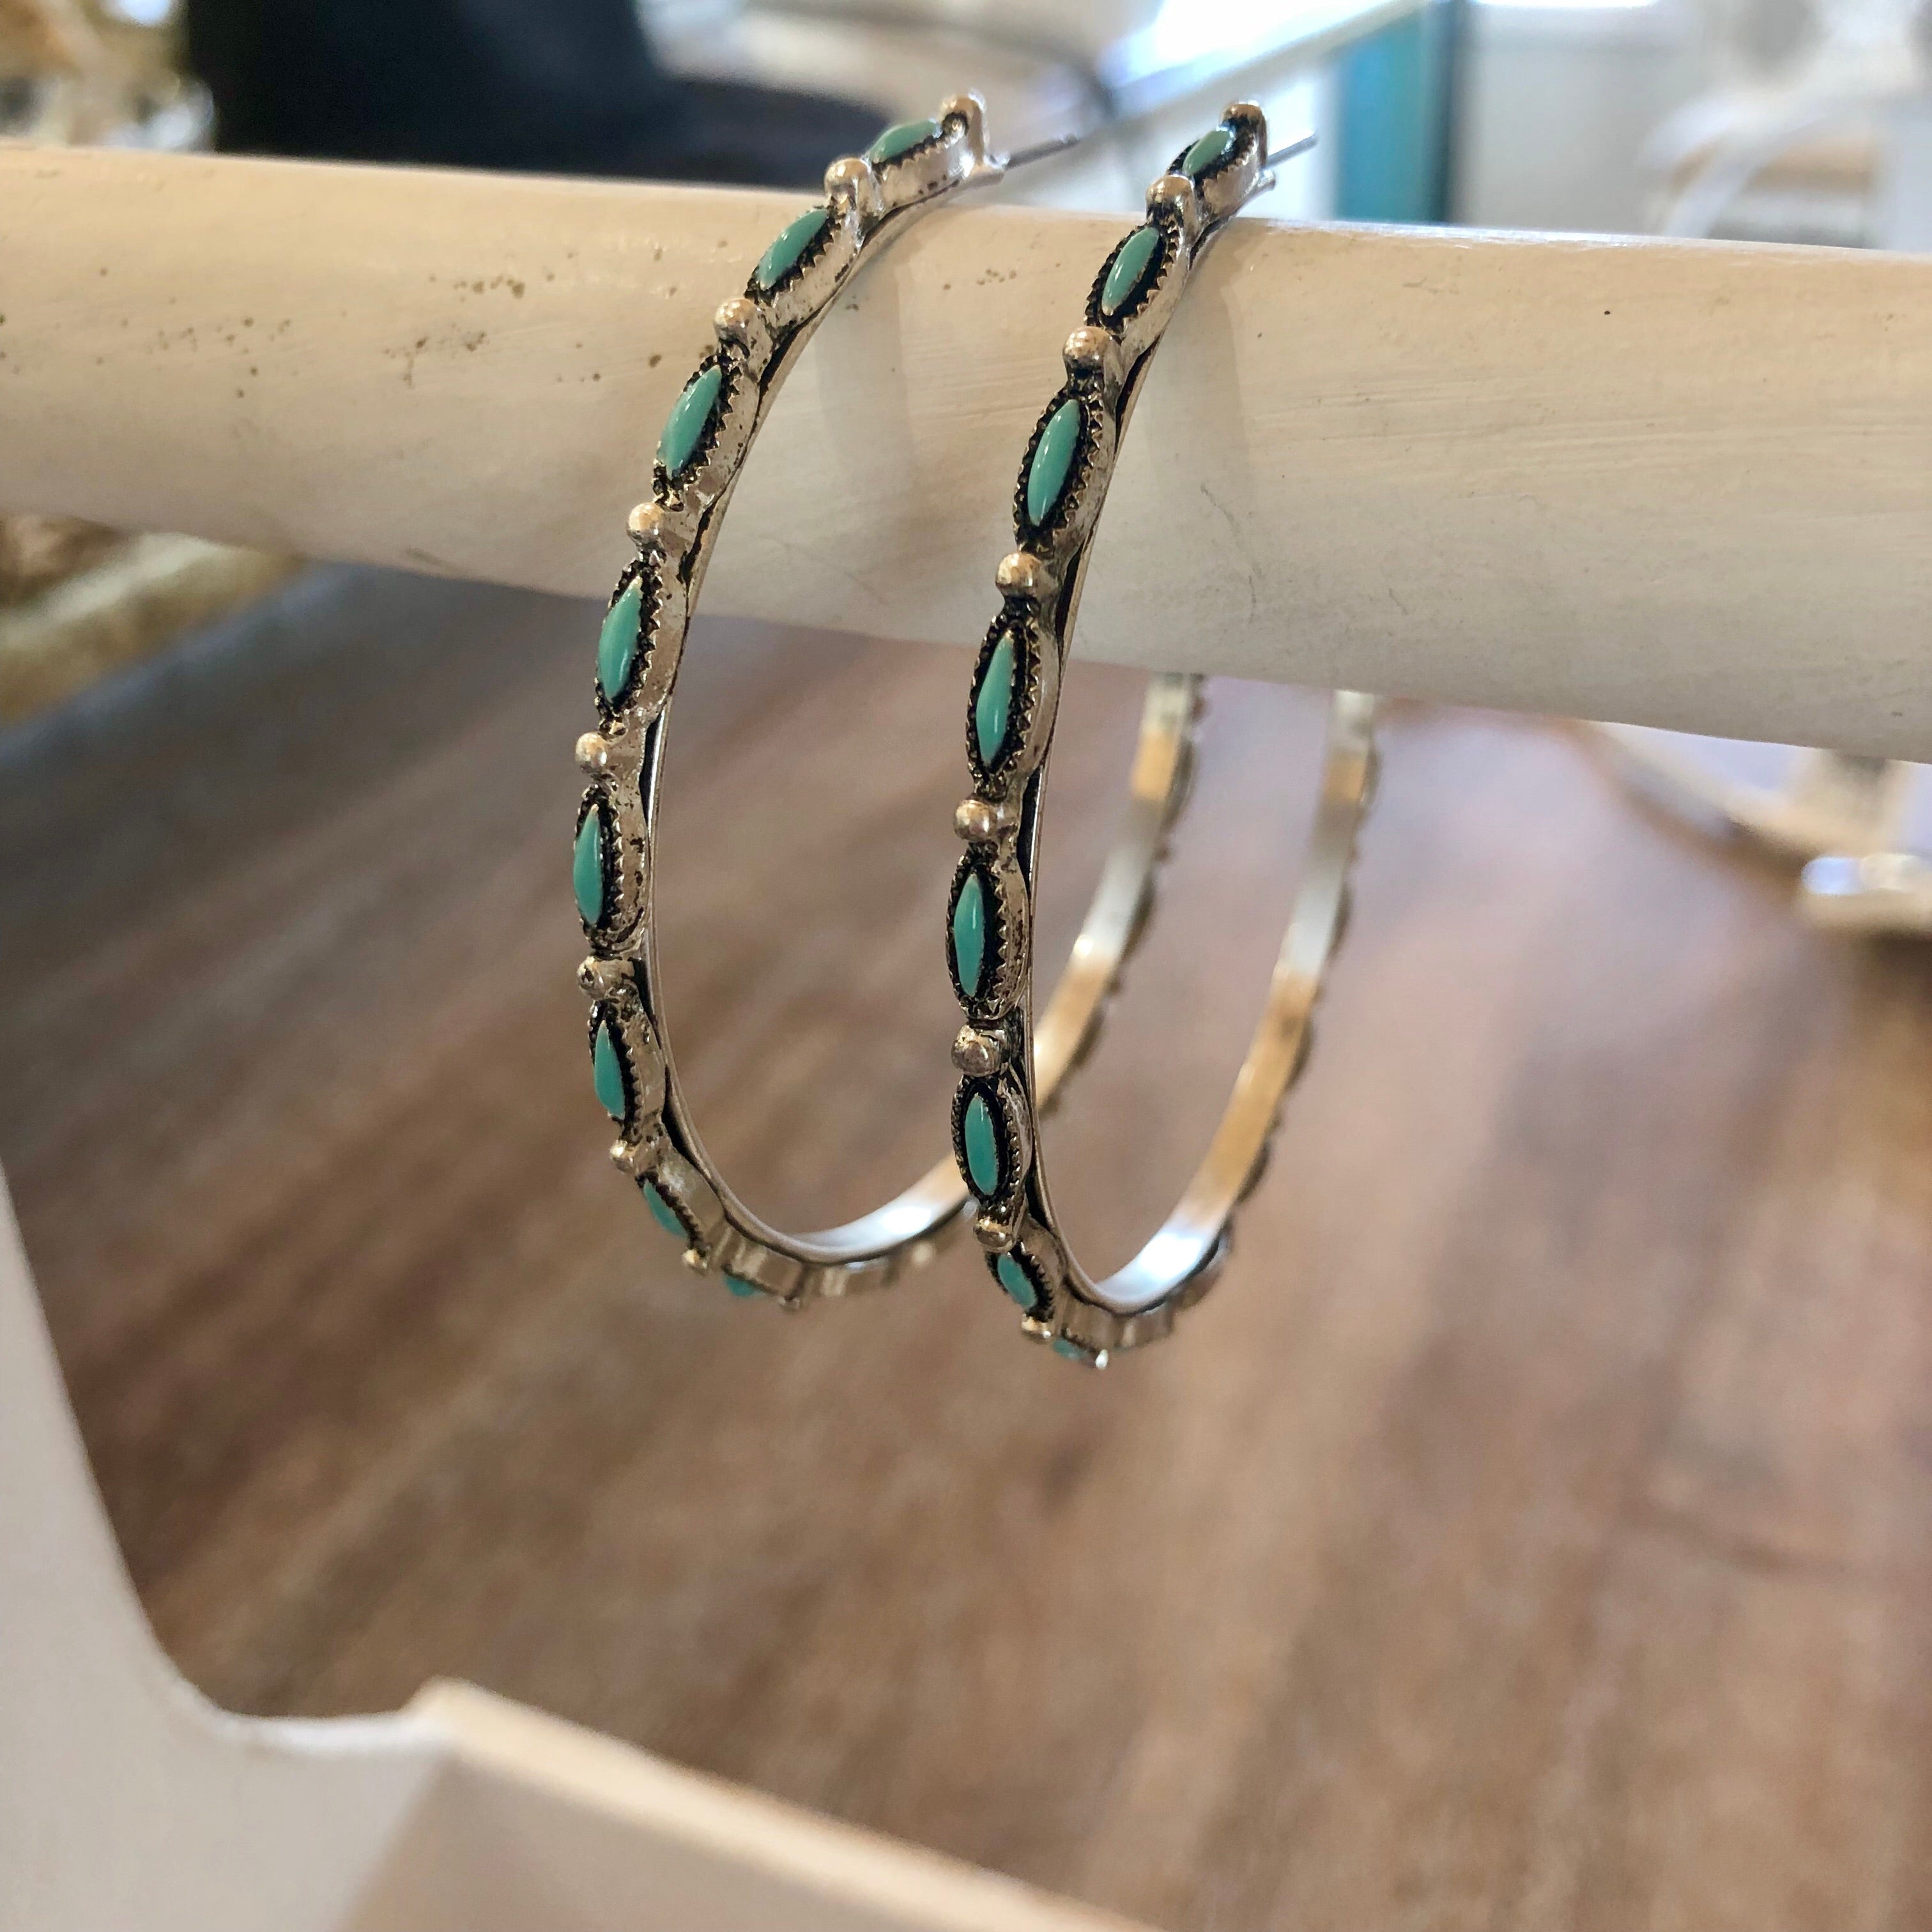 Large Silver Tone and Turquoise Hoop Earrings - Giddy Up Glamour Boutique